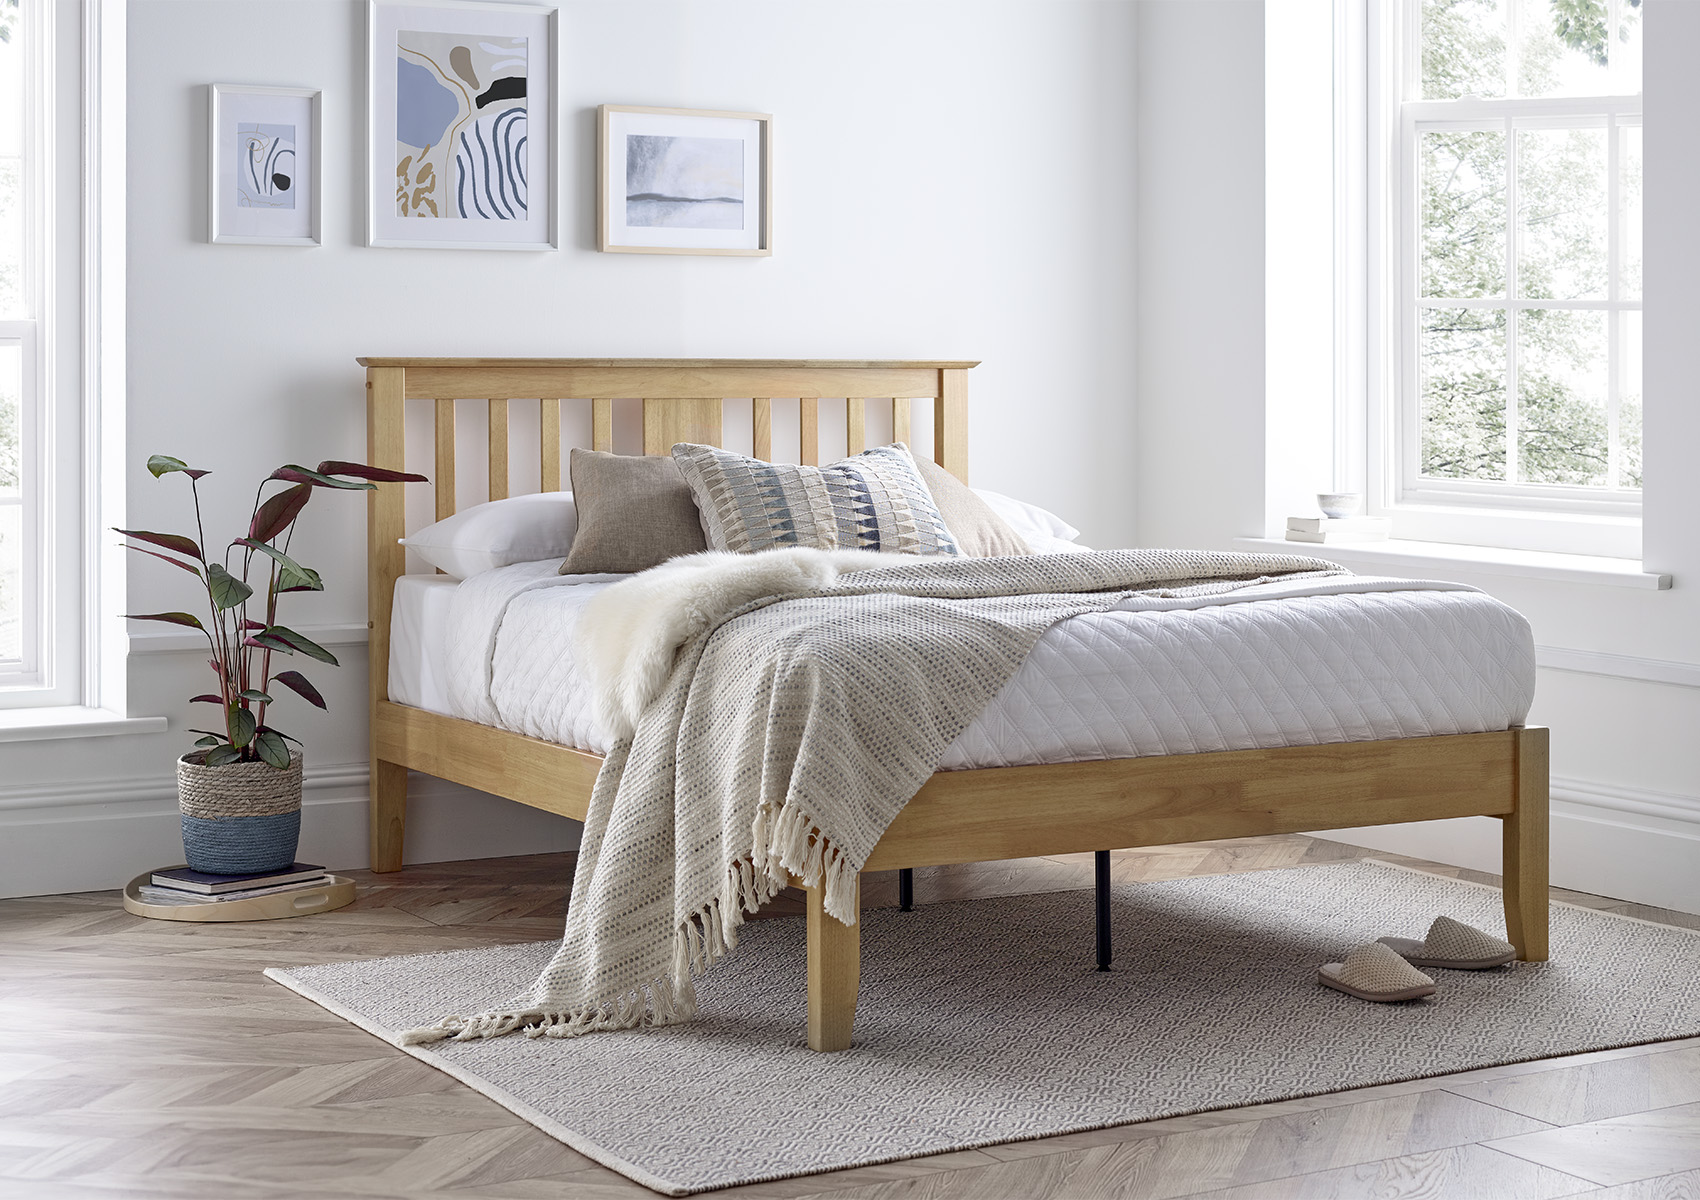 View Malmo Light Wood Wooden King Size Bed Time4Sleep information